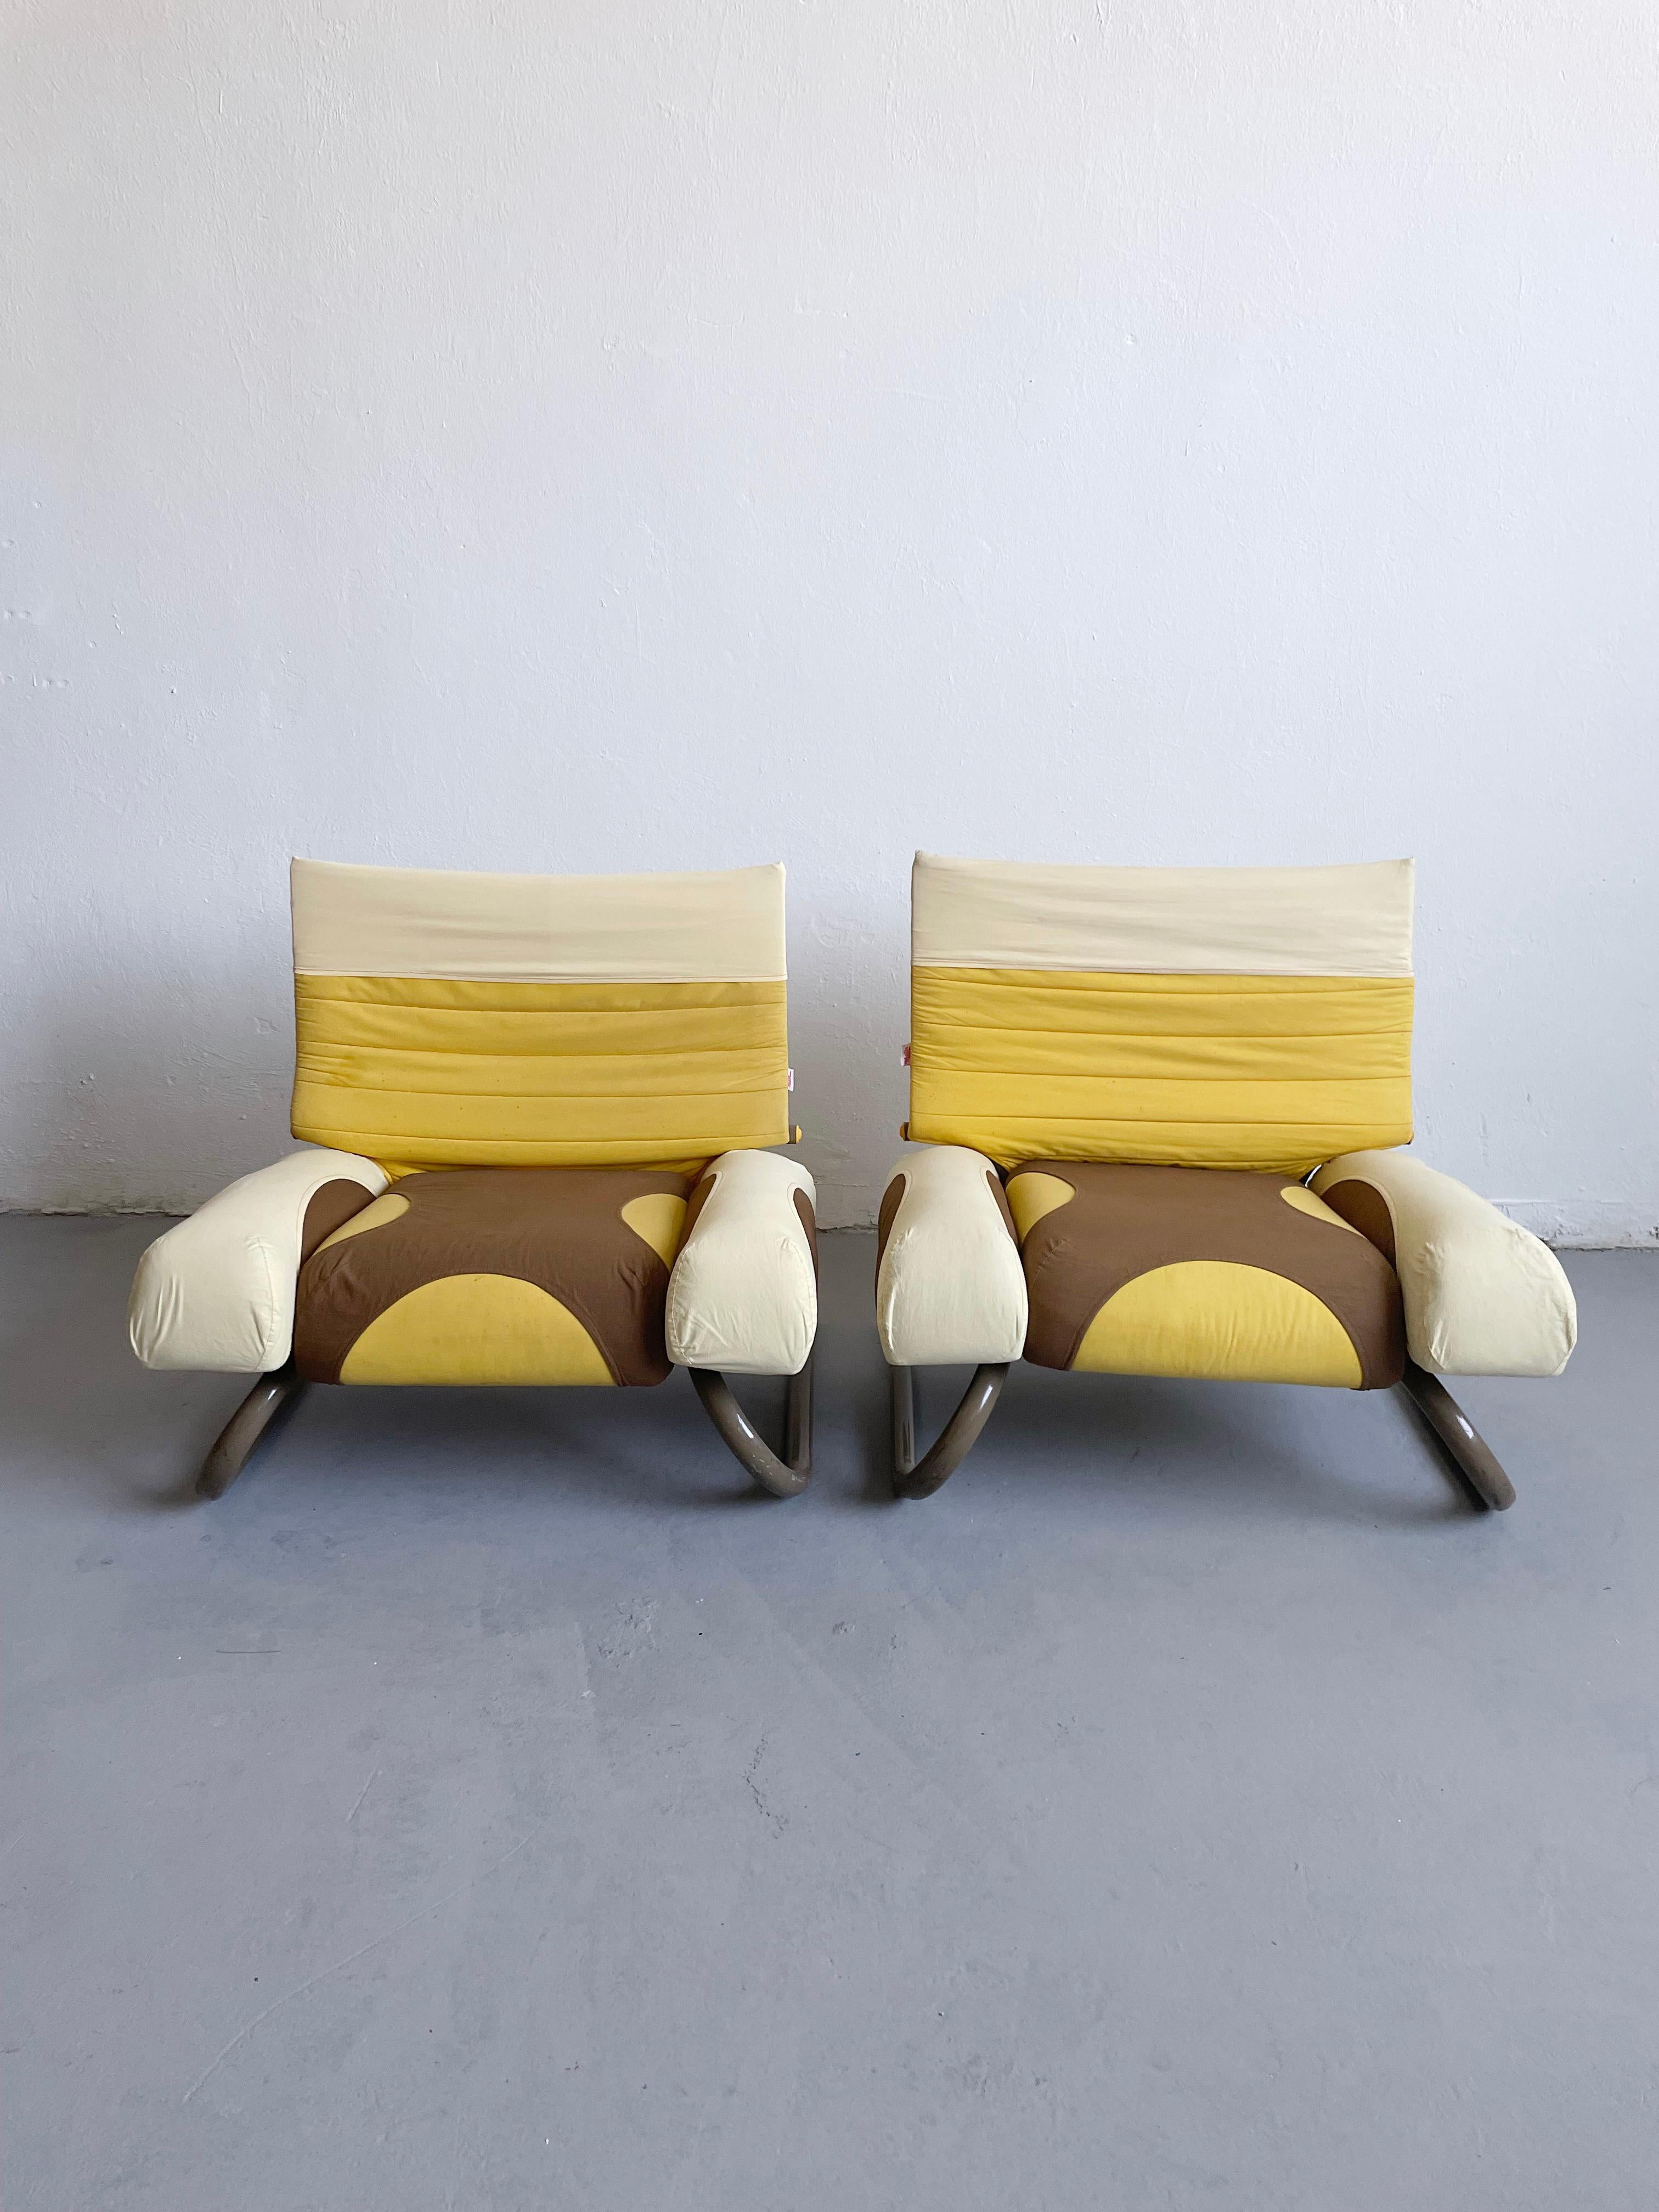 Post-Modern Set of 2 'Peter Pan' Lounge Chairs, Michele De Lucchi for Thalia&Co, Italy, 1982 For Sale